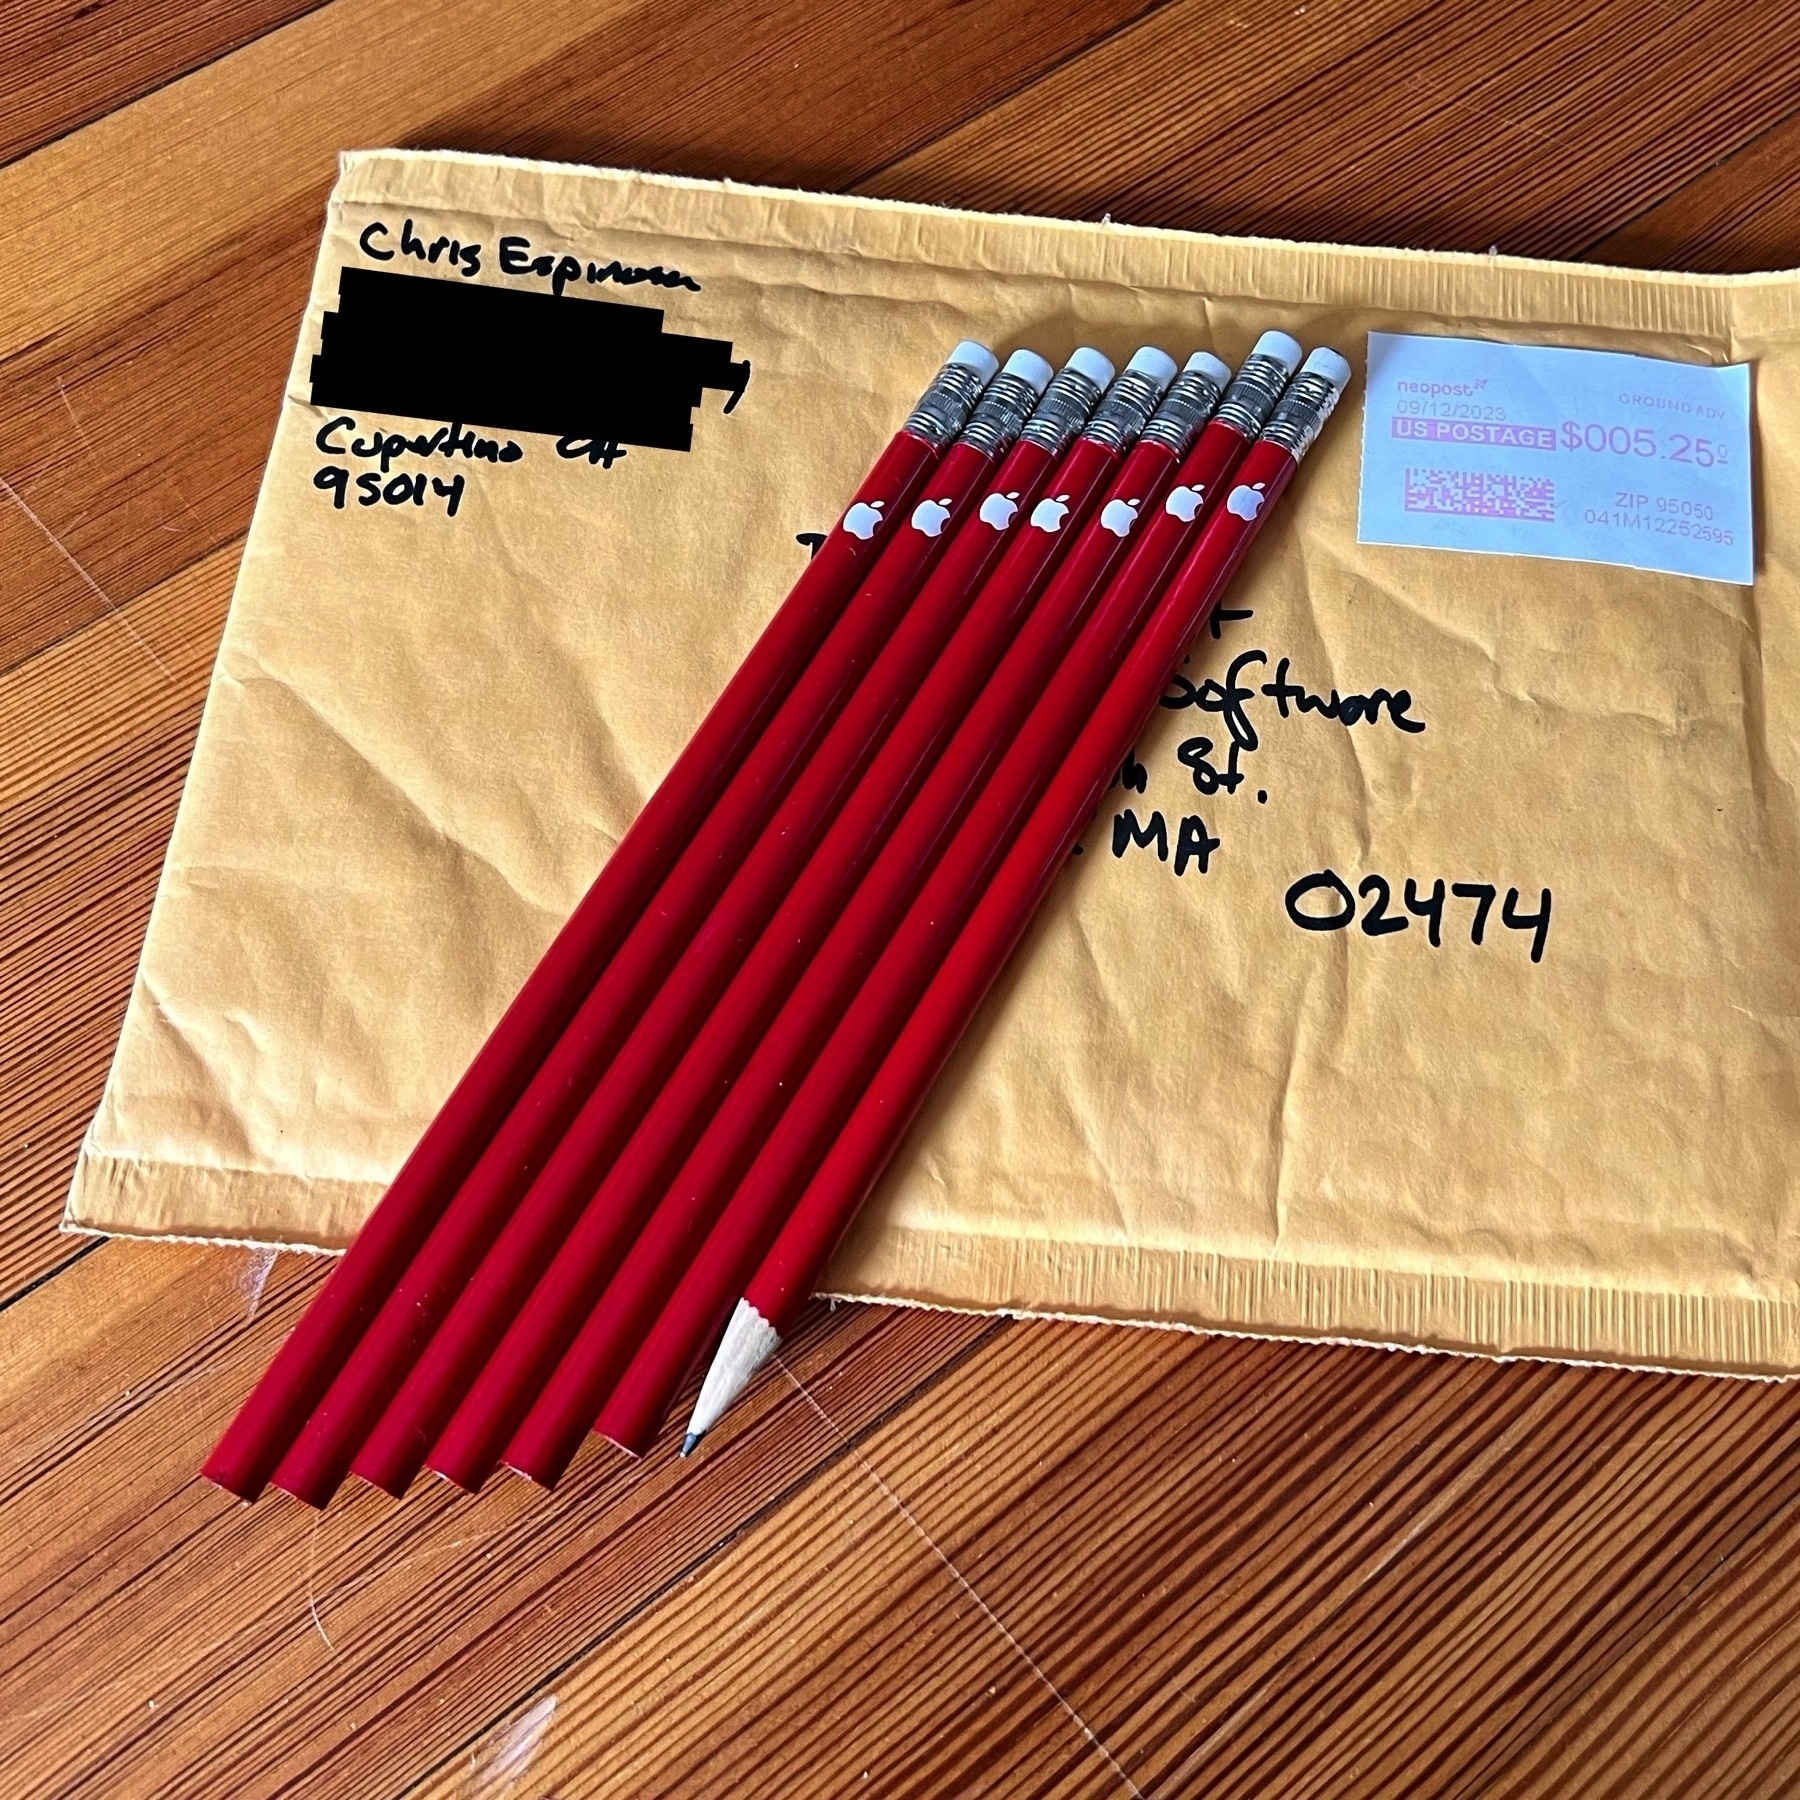 Picture of seven red pencils with white Apple logos, arranged in a diagonal row on top of a shipping envelope